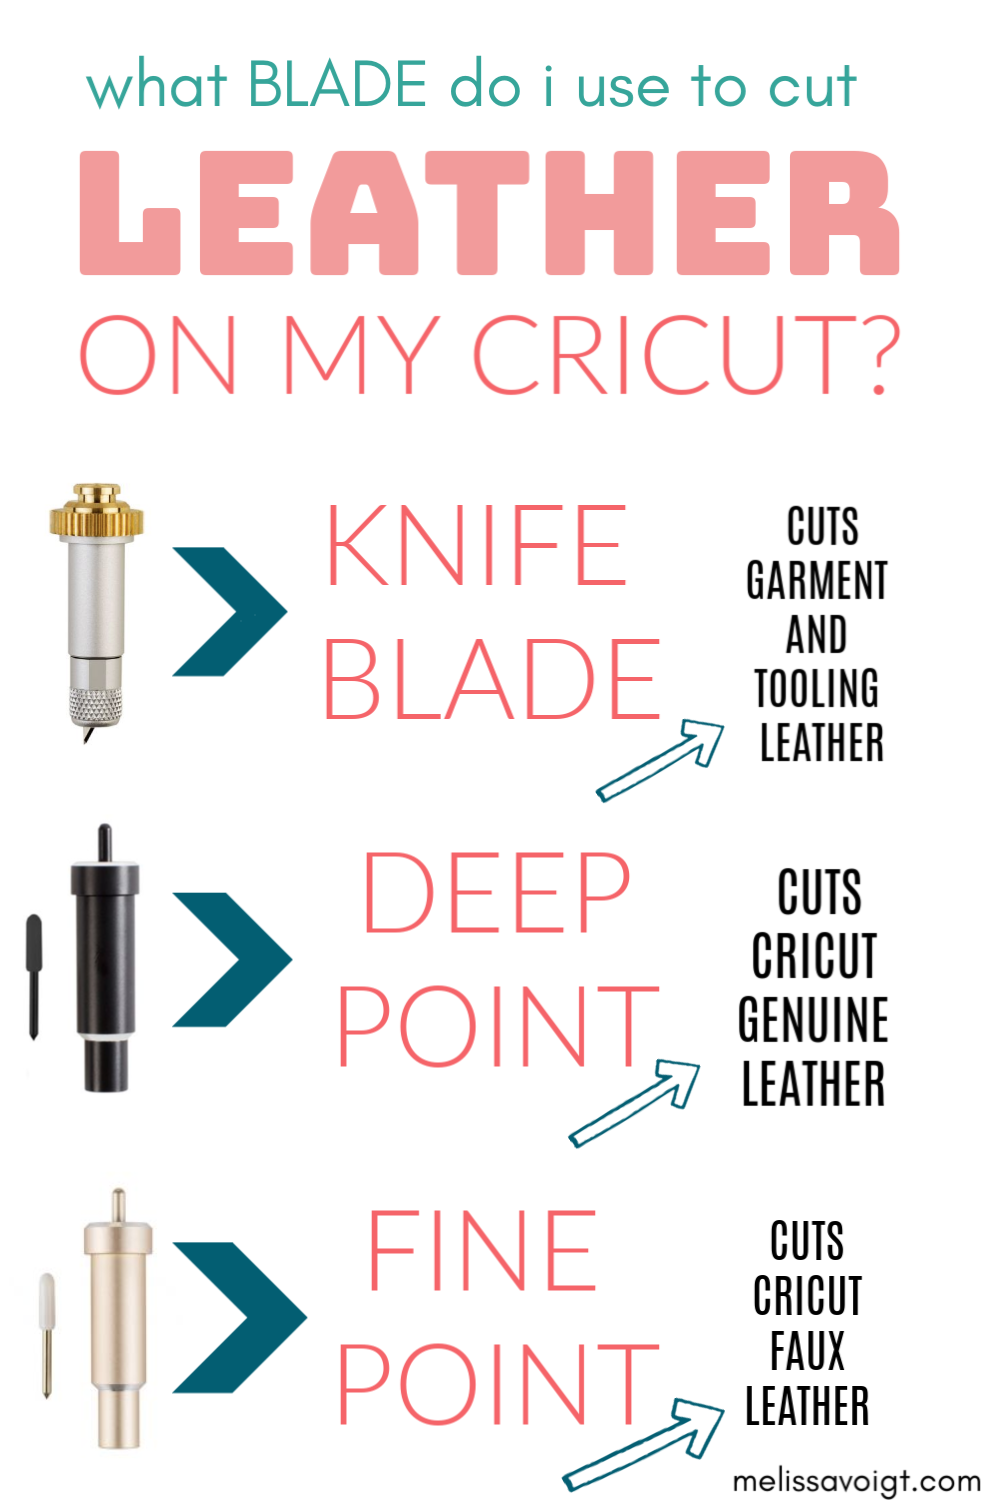 5 Must-Have Cricut Leather Crafting Tools